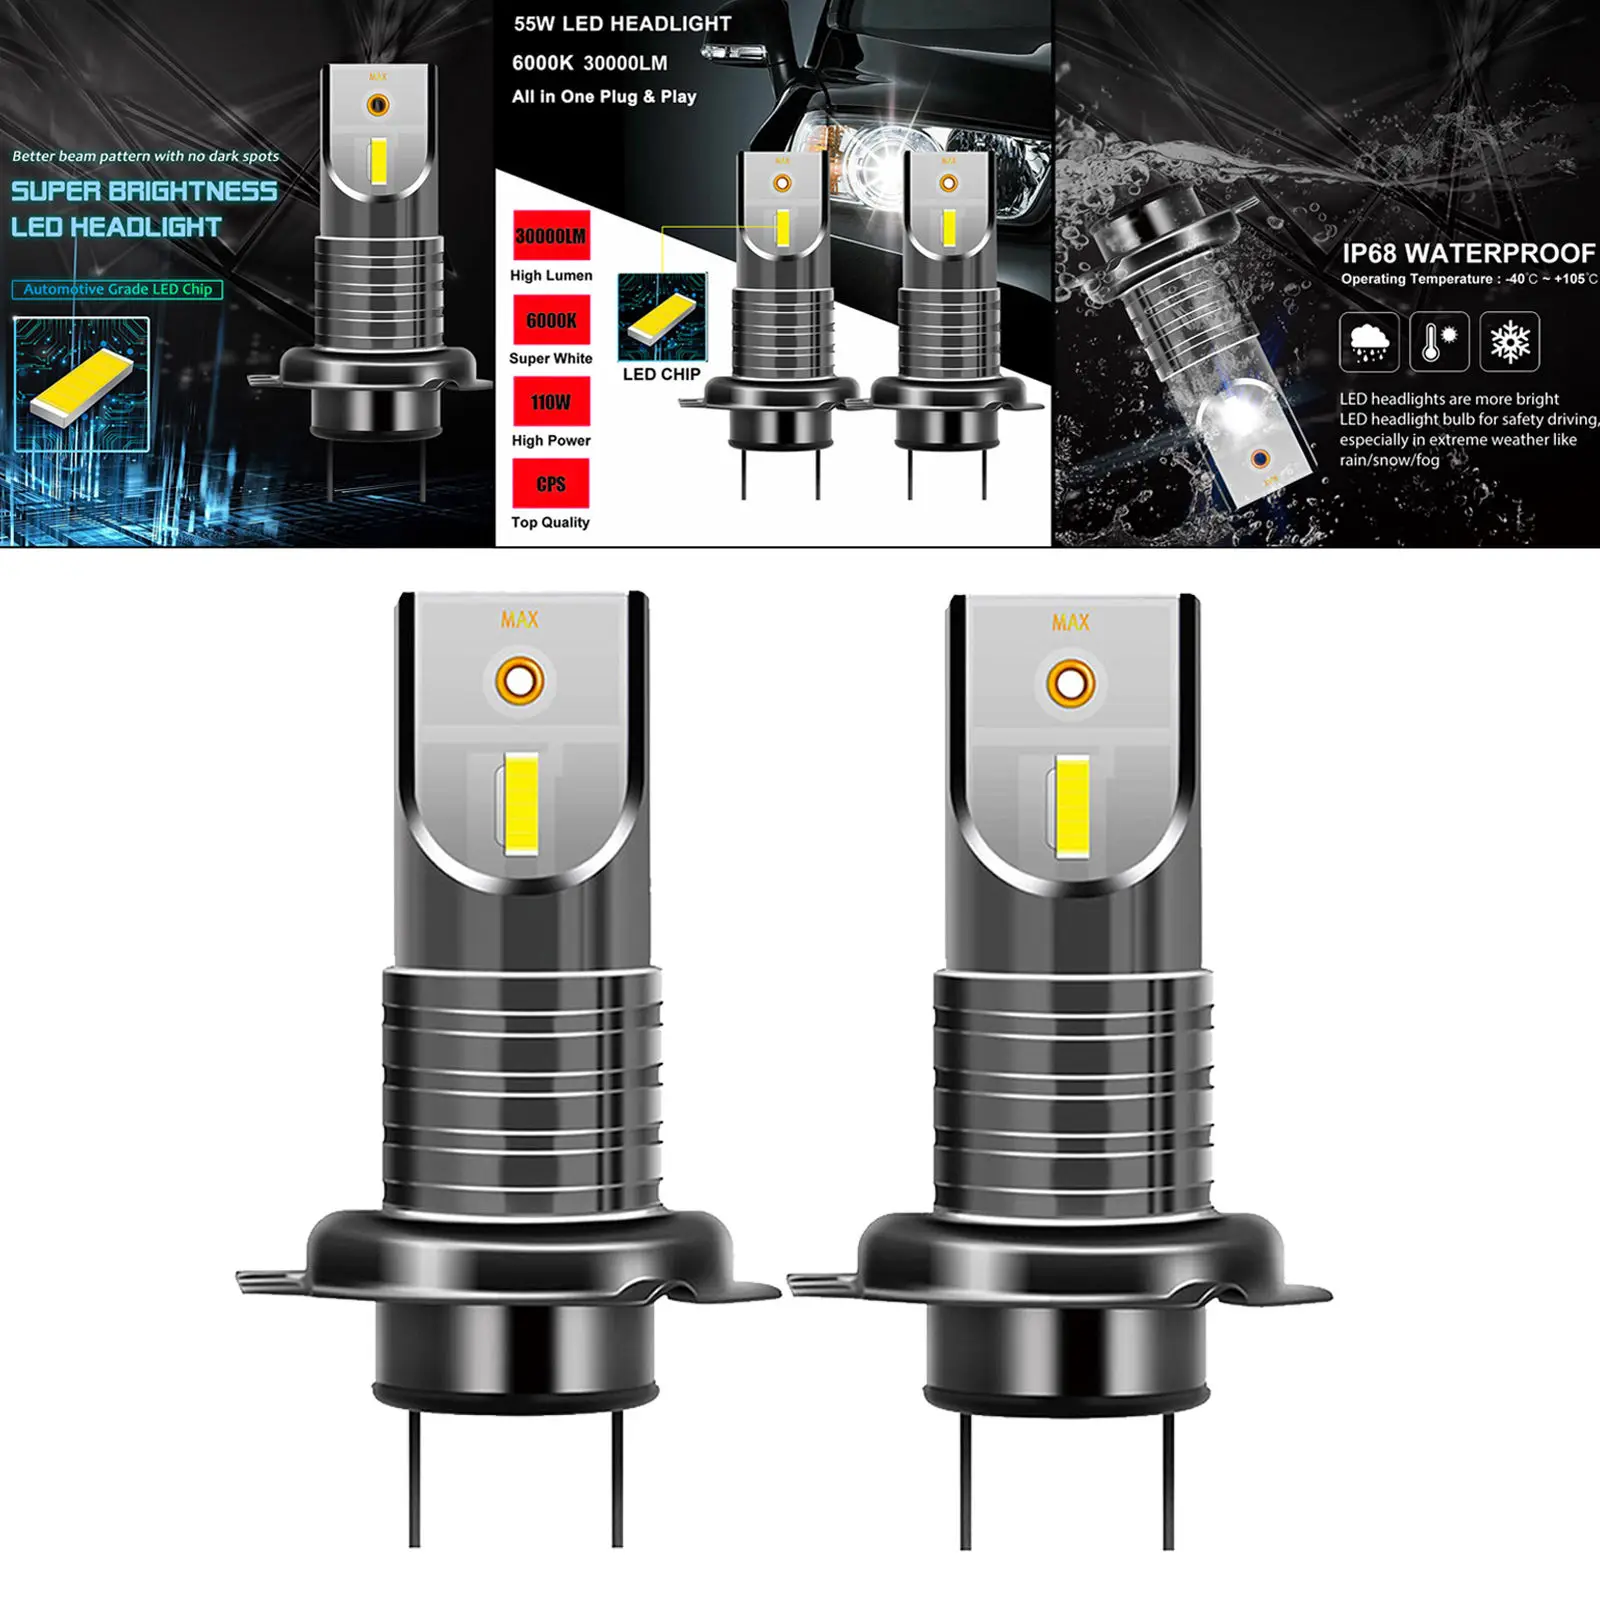 2 Pack H7 LED Headlight Bulbs 55W 6500K Bright LED Headlight Conversion Kit Car Halogen Lights Replacement Car Accessories